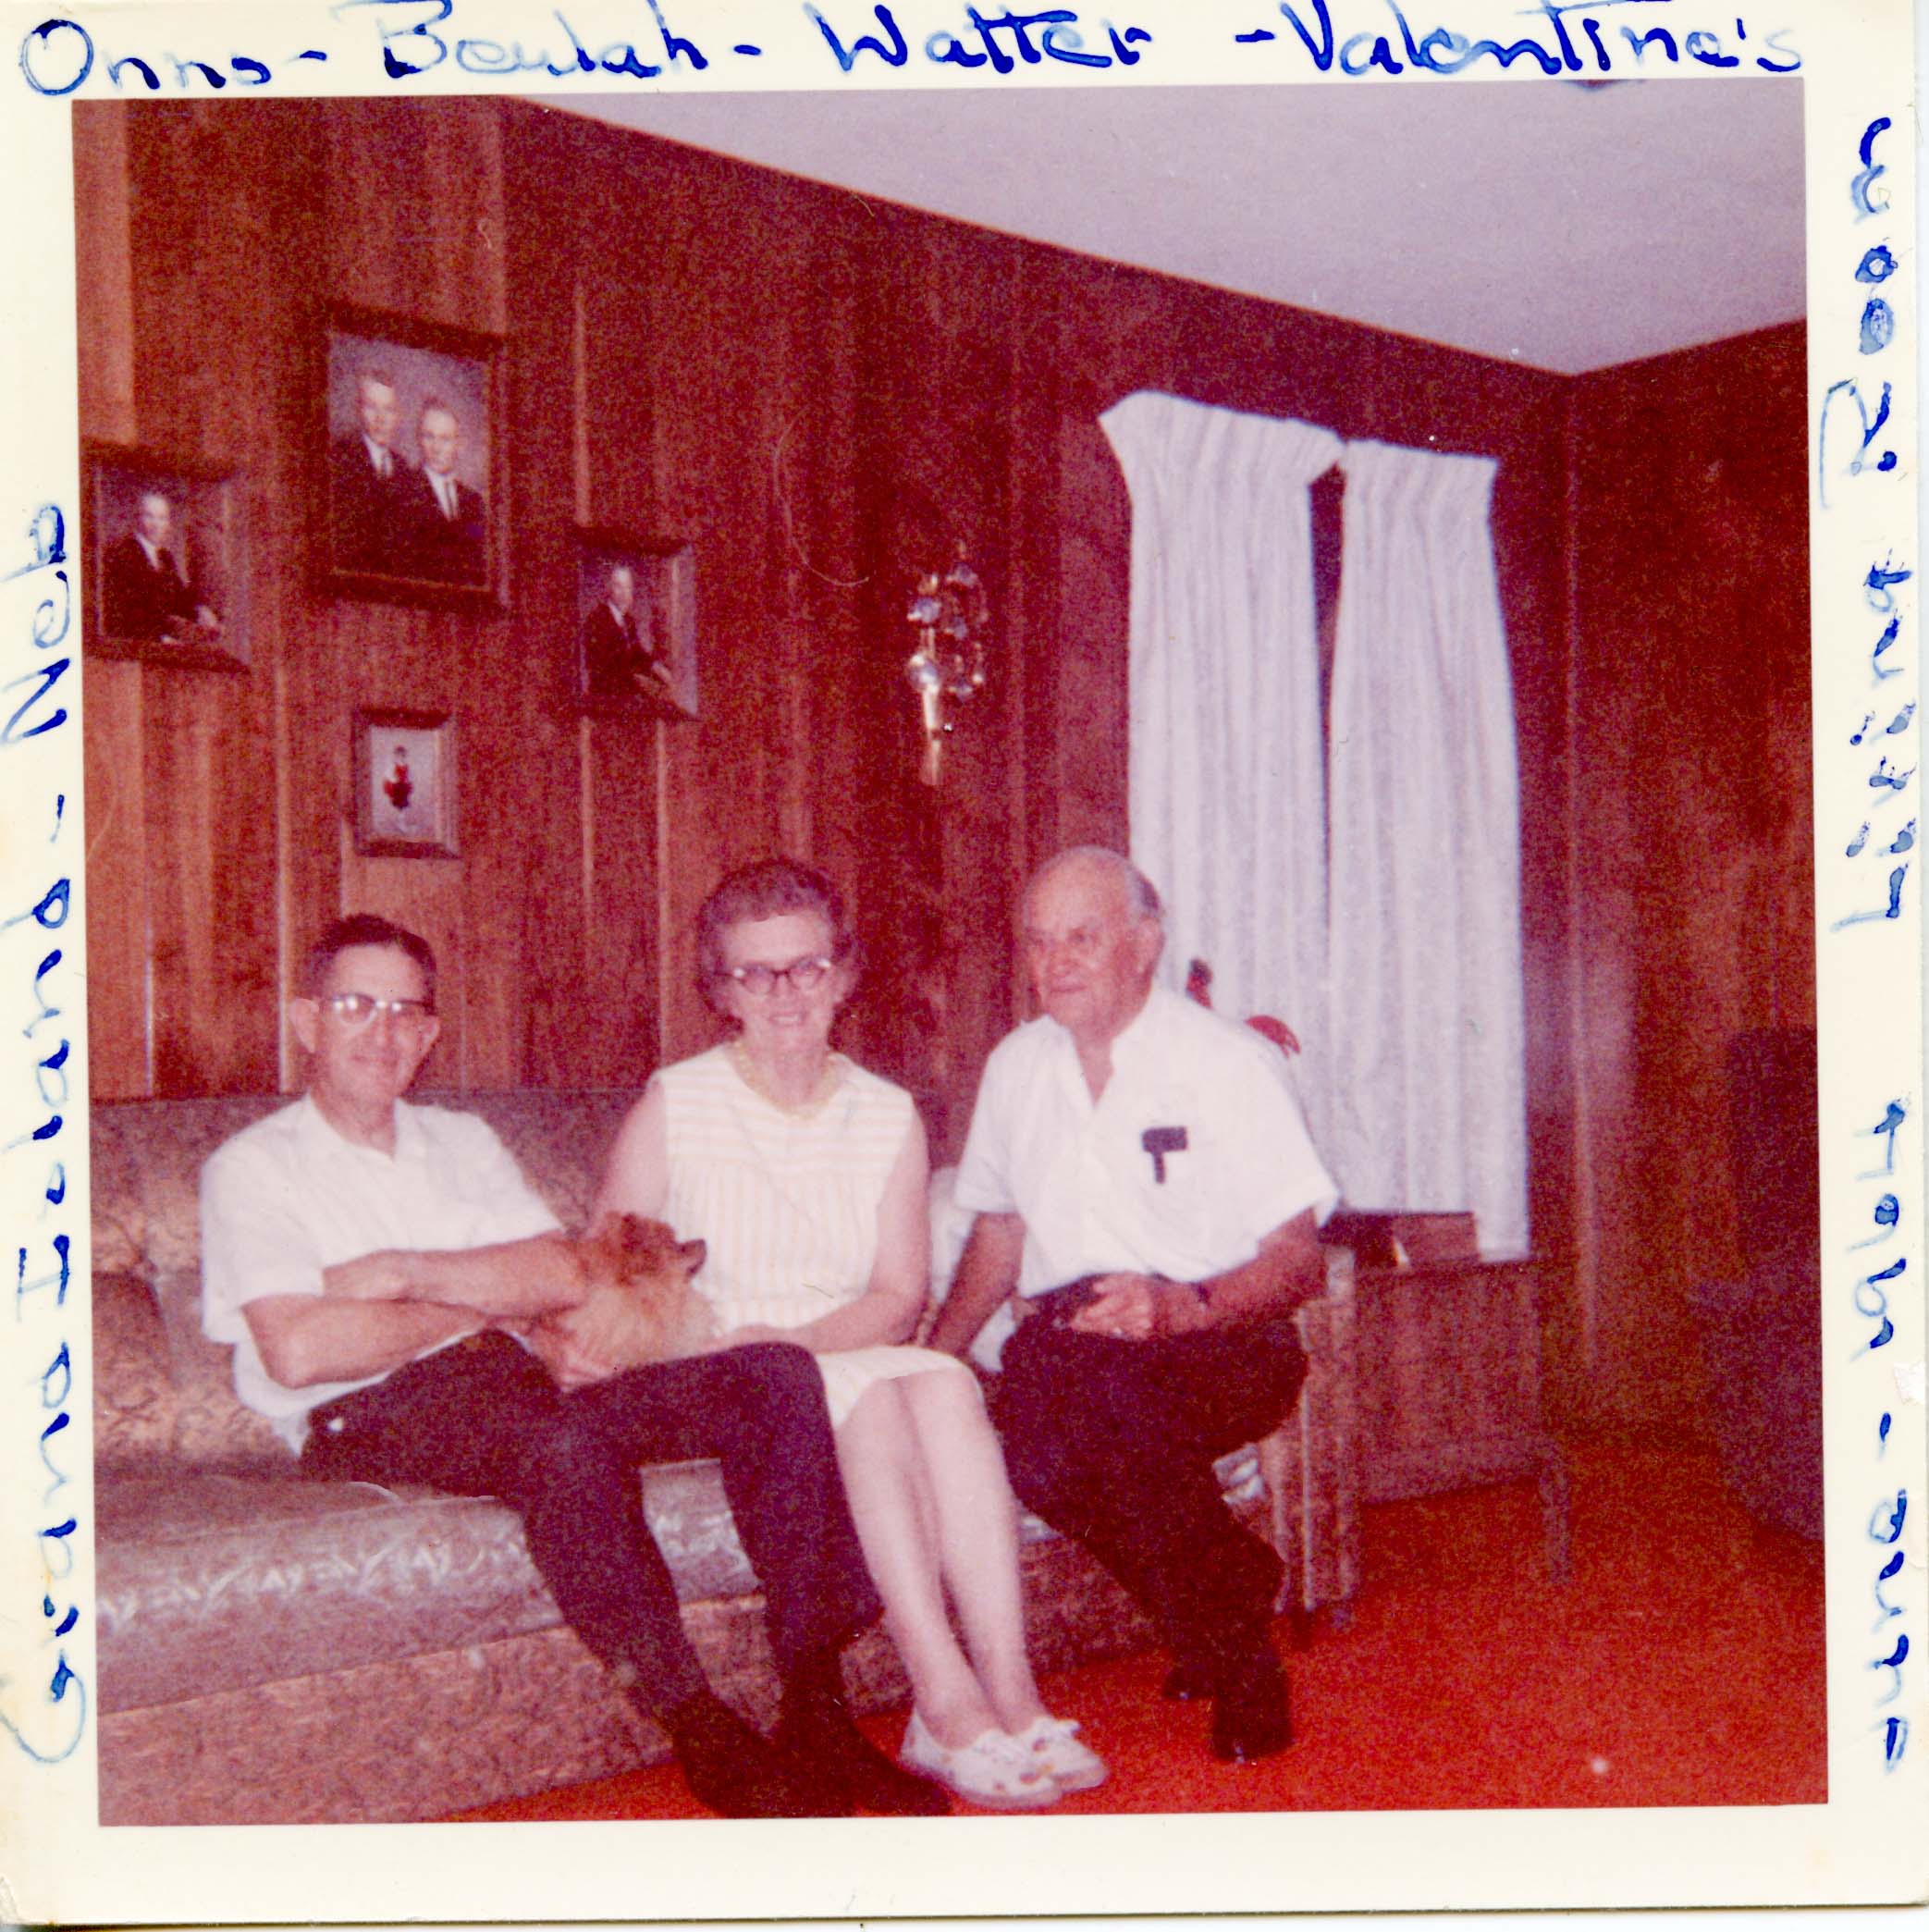 Photo of Onno and Beulah Valentine with Walter May 1964